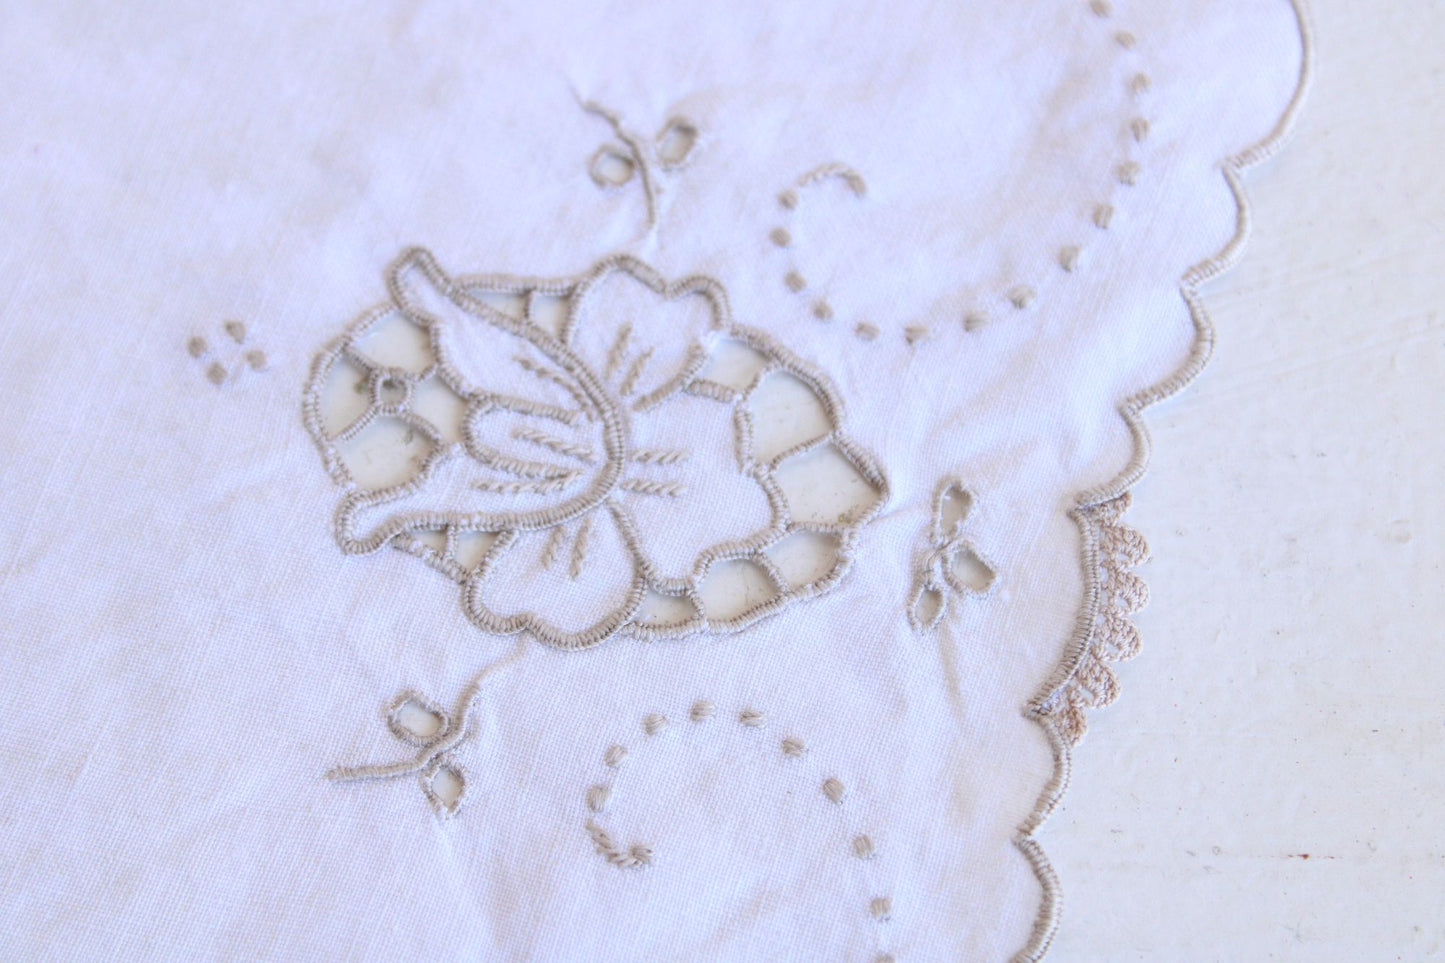 Vintage 1930s Linen Placemat or Doily, Beige With Embroidery